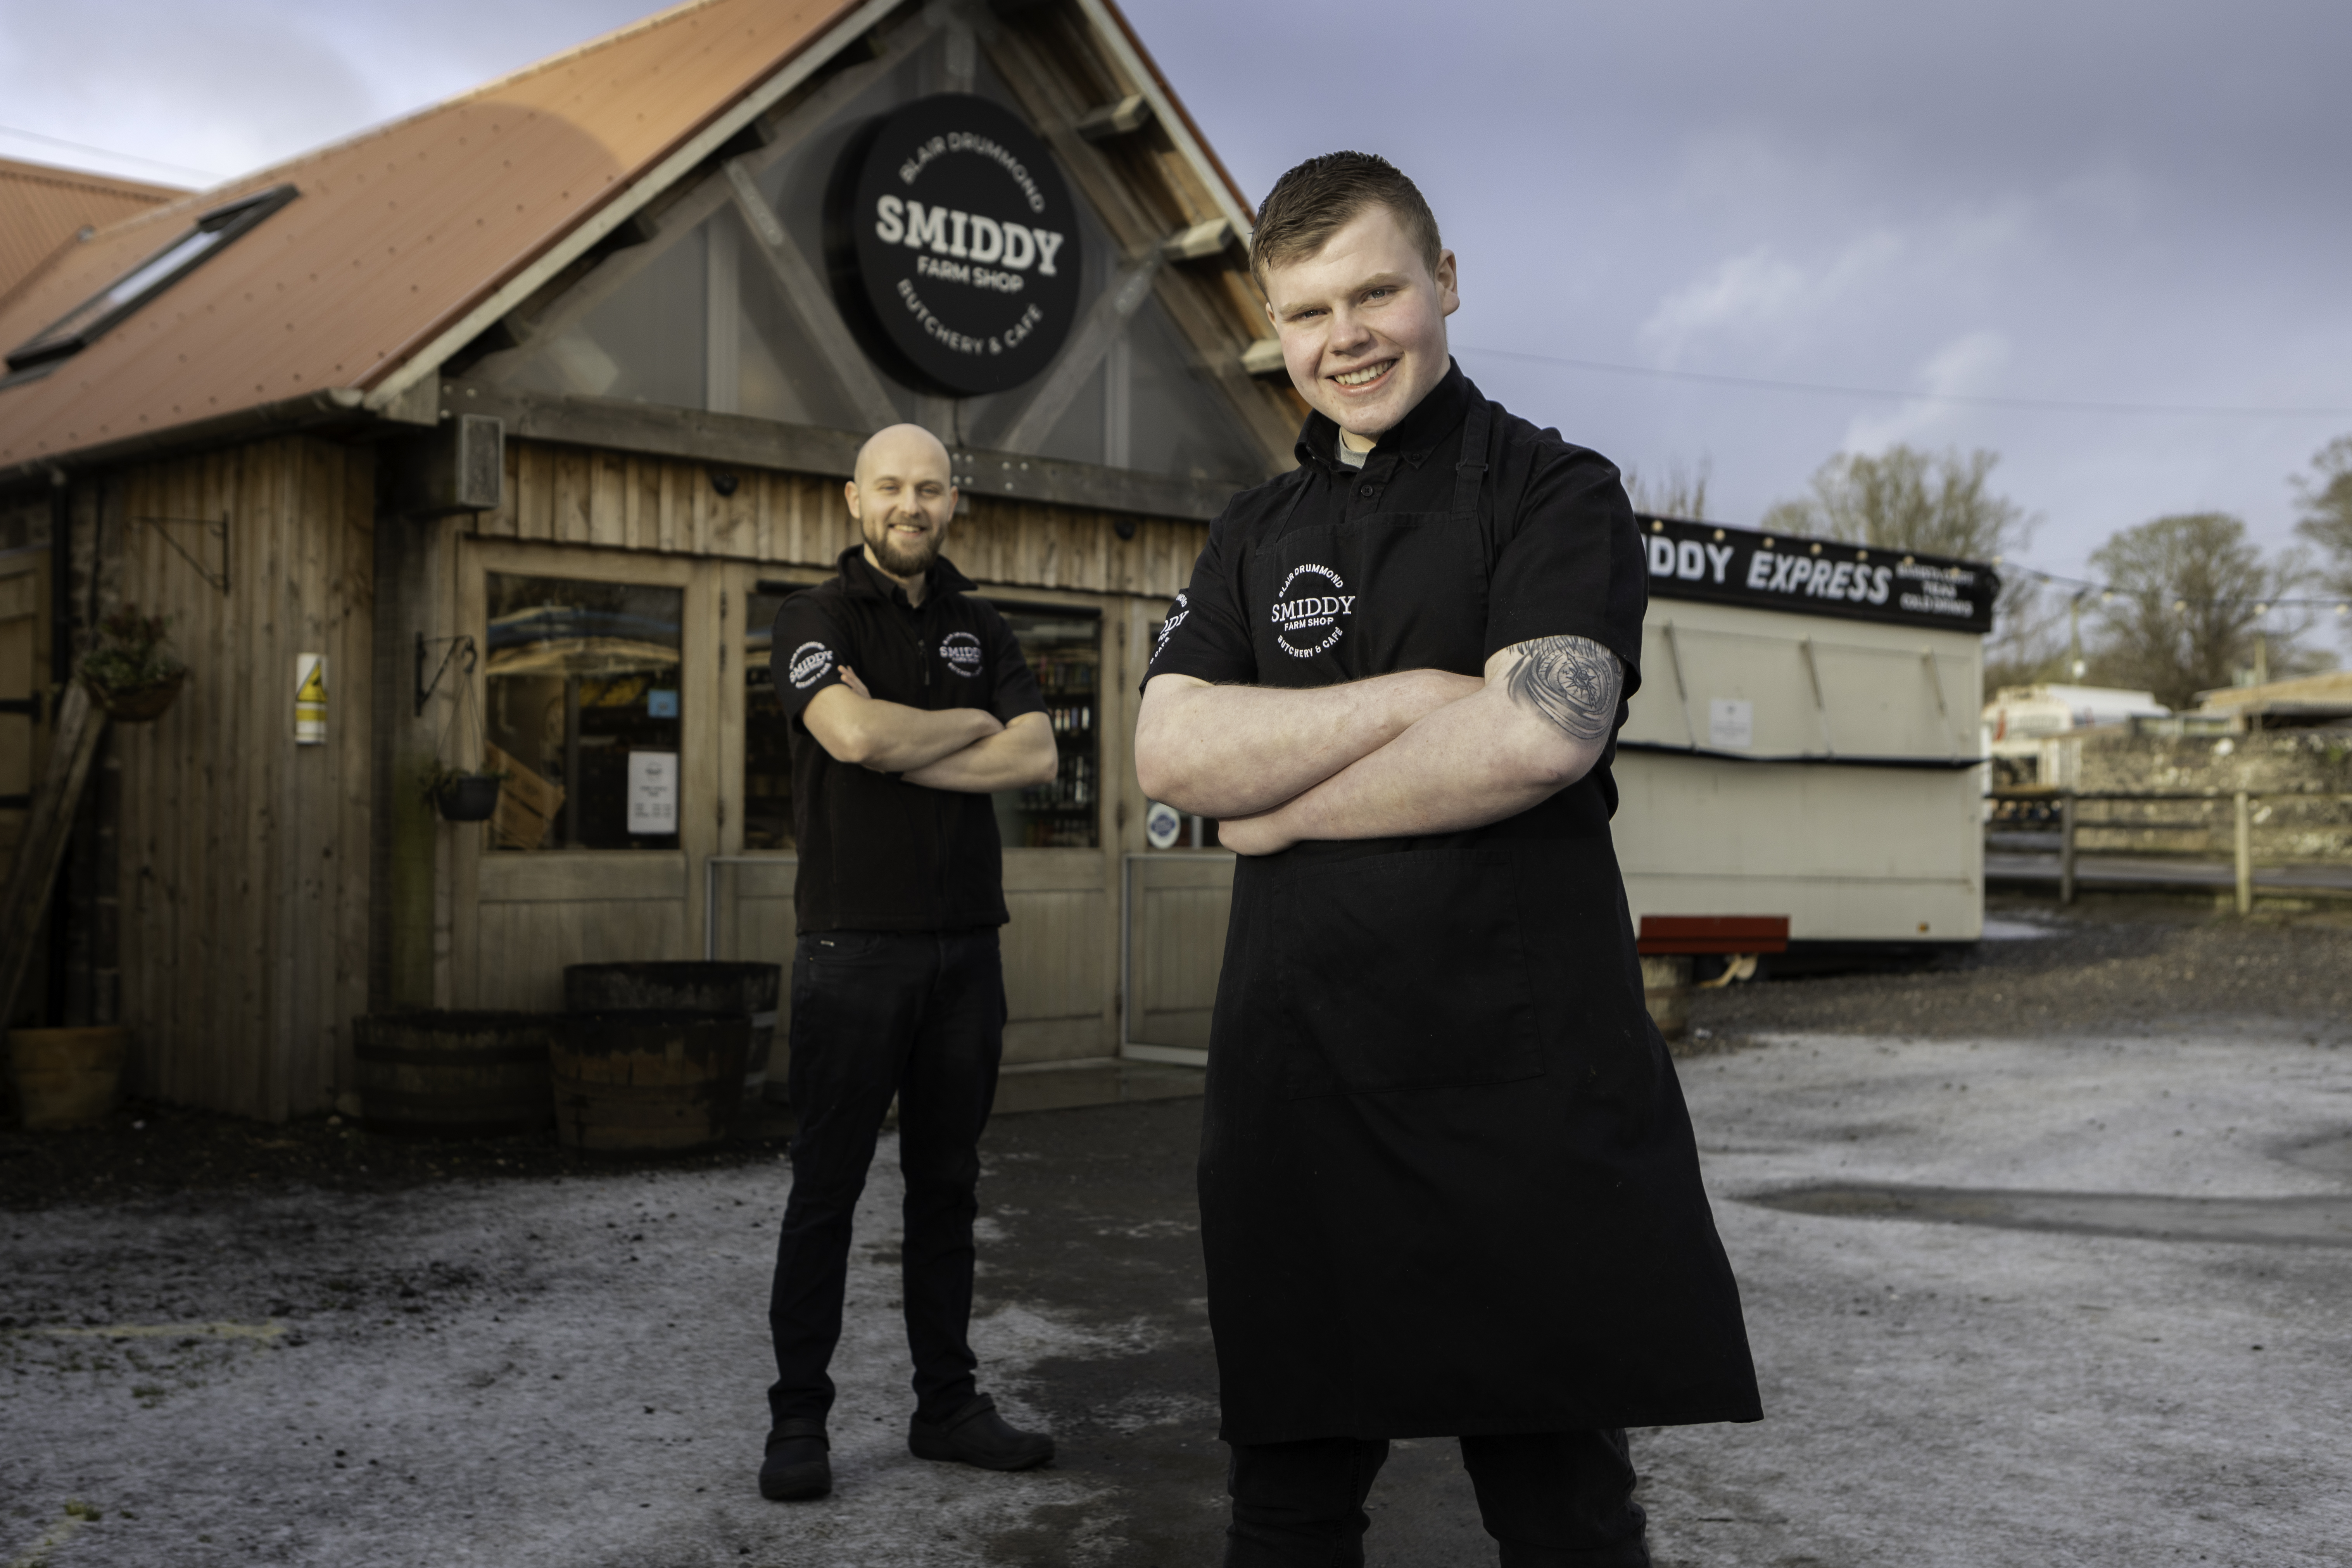 Marc and Fraser stand with arms crossed smiling to camera in front of a wooden clad building that houses the Smiddy Farm Shop where they work.